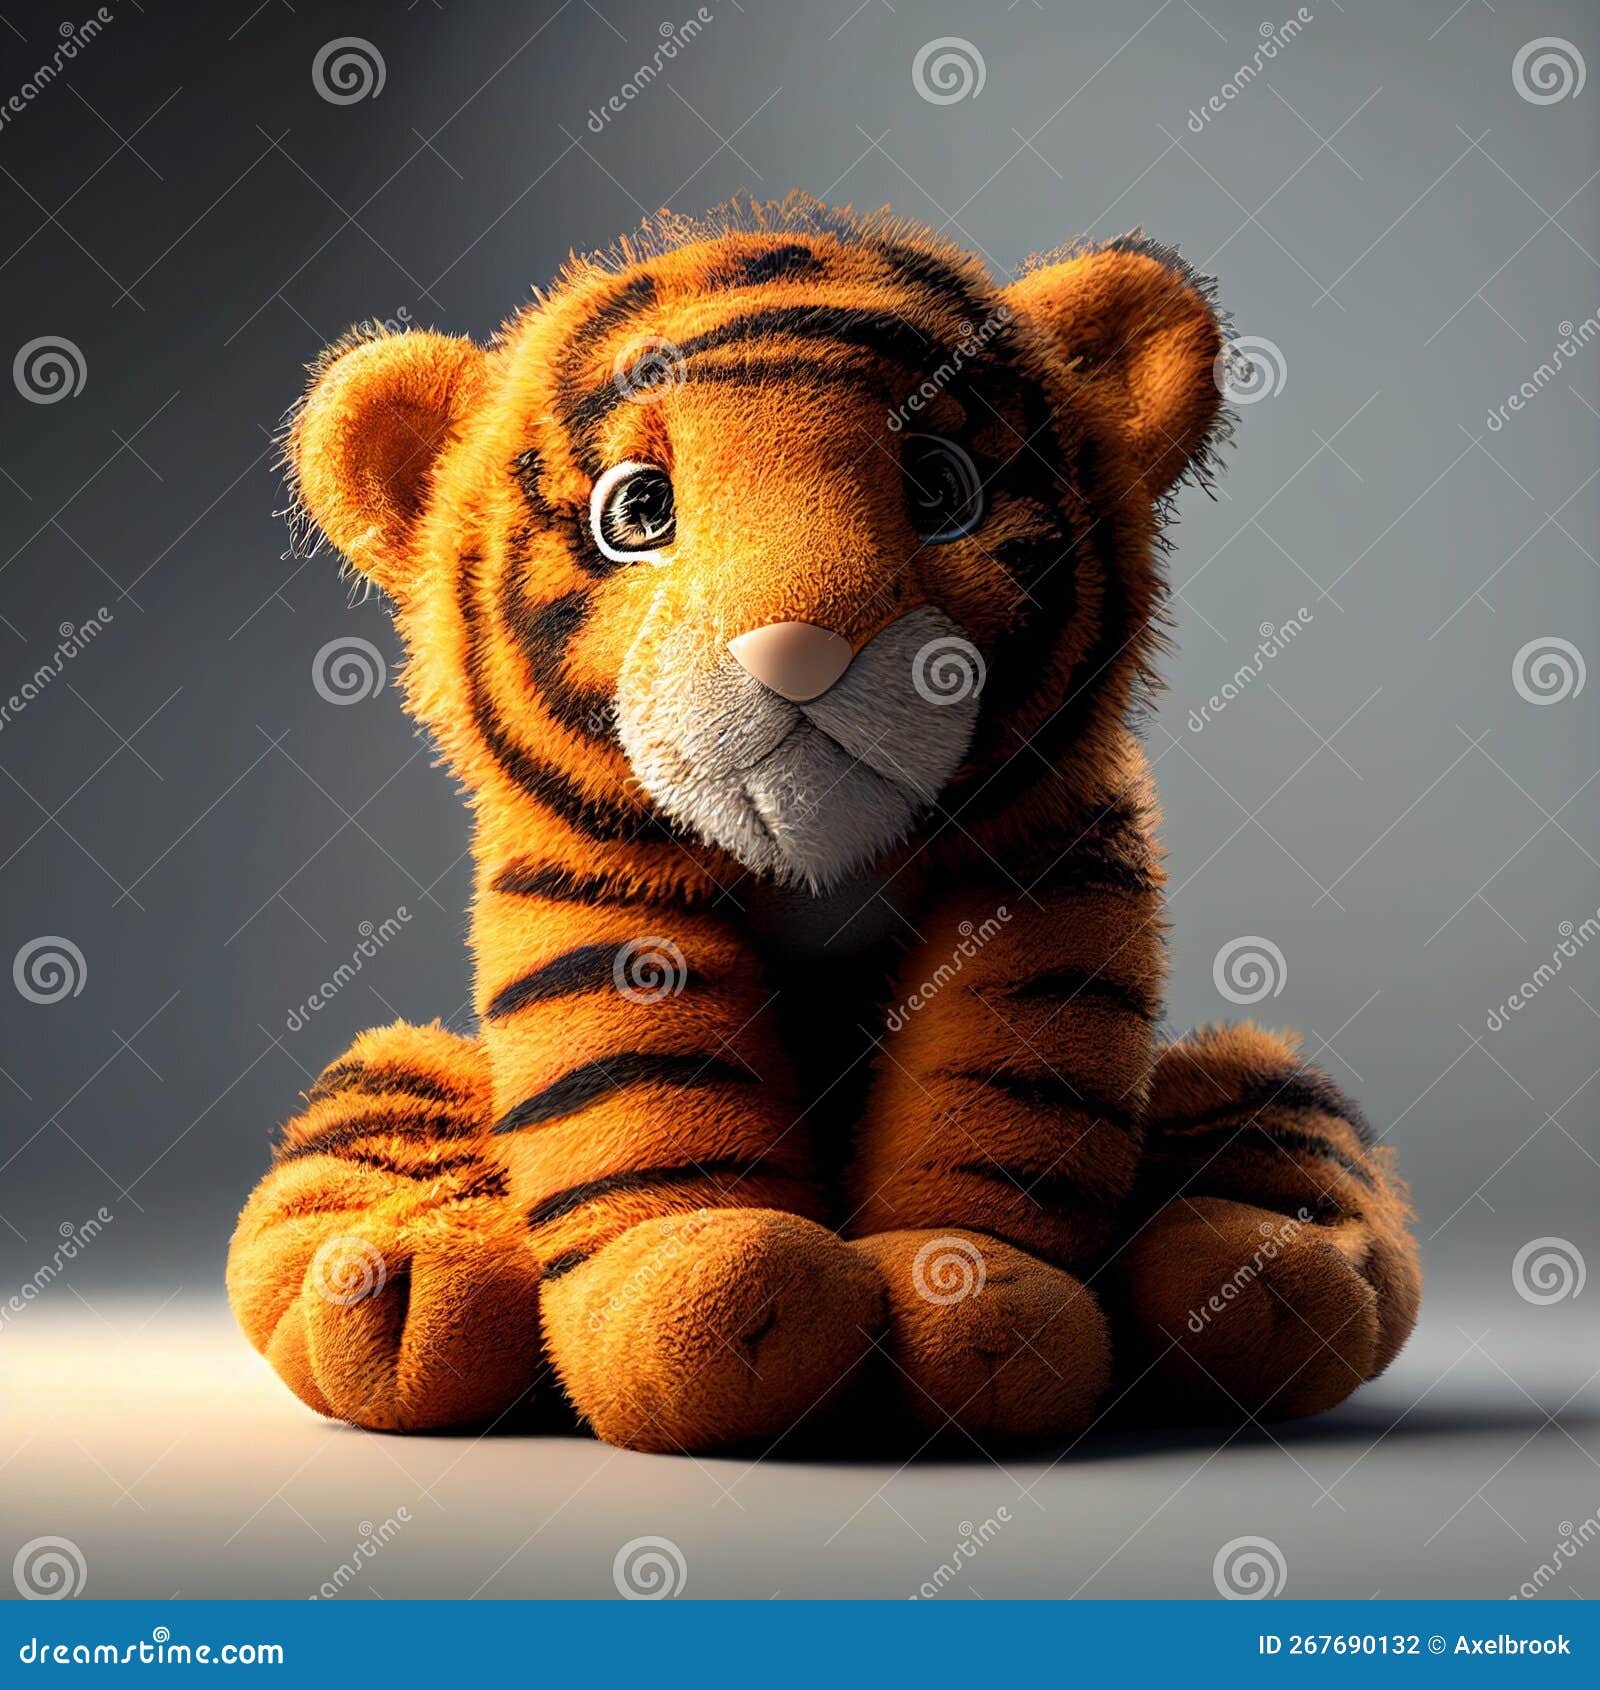 3d Rendered Illustration Of Sitting Tiger Cartoon Character Stock Photo,  Picture and Royalty Free Image. Image 53977474.